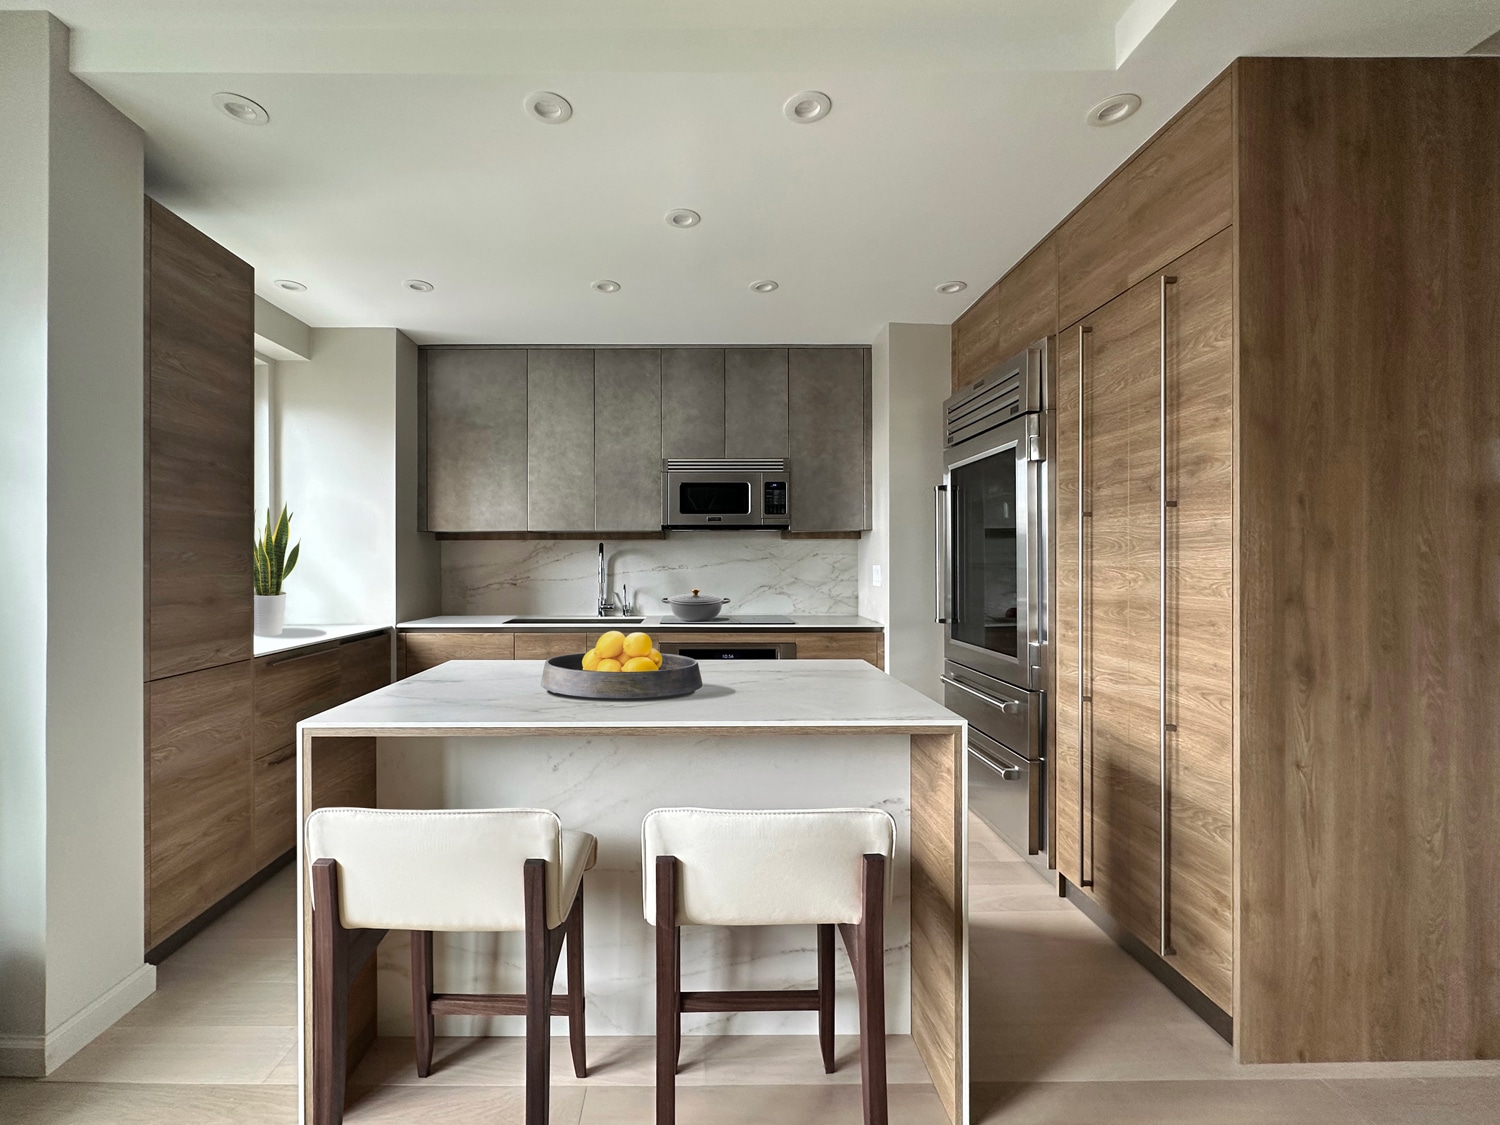 Upper East Side, New York, NY. YOTA and Rho cabinetry in Ghisa Urban lacquer and wood melamine. Countertop & Backsplash in Dekton Rem. Designed by Lorena Polon, Senior Design Consultant of MandiCasa New York, in collaboration with Matthew Yee Interiors.
